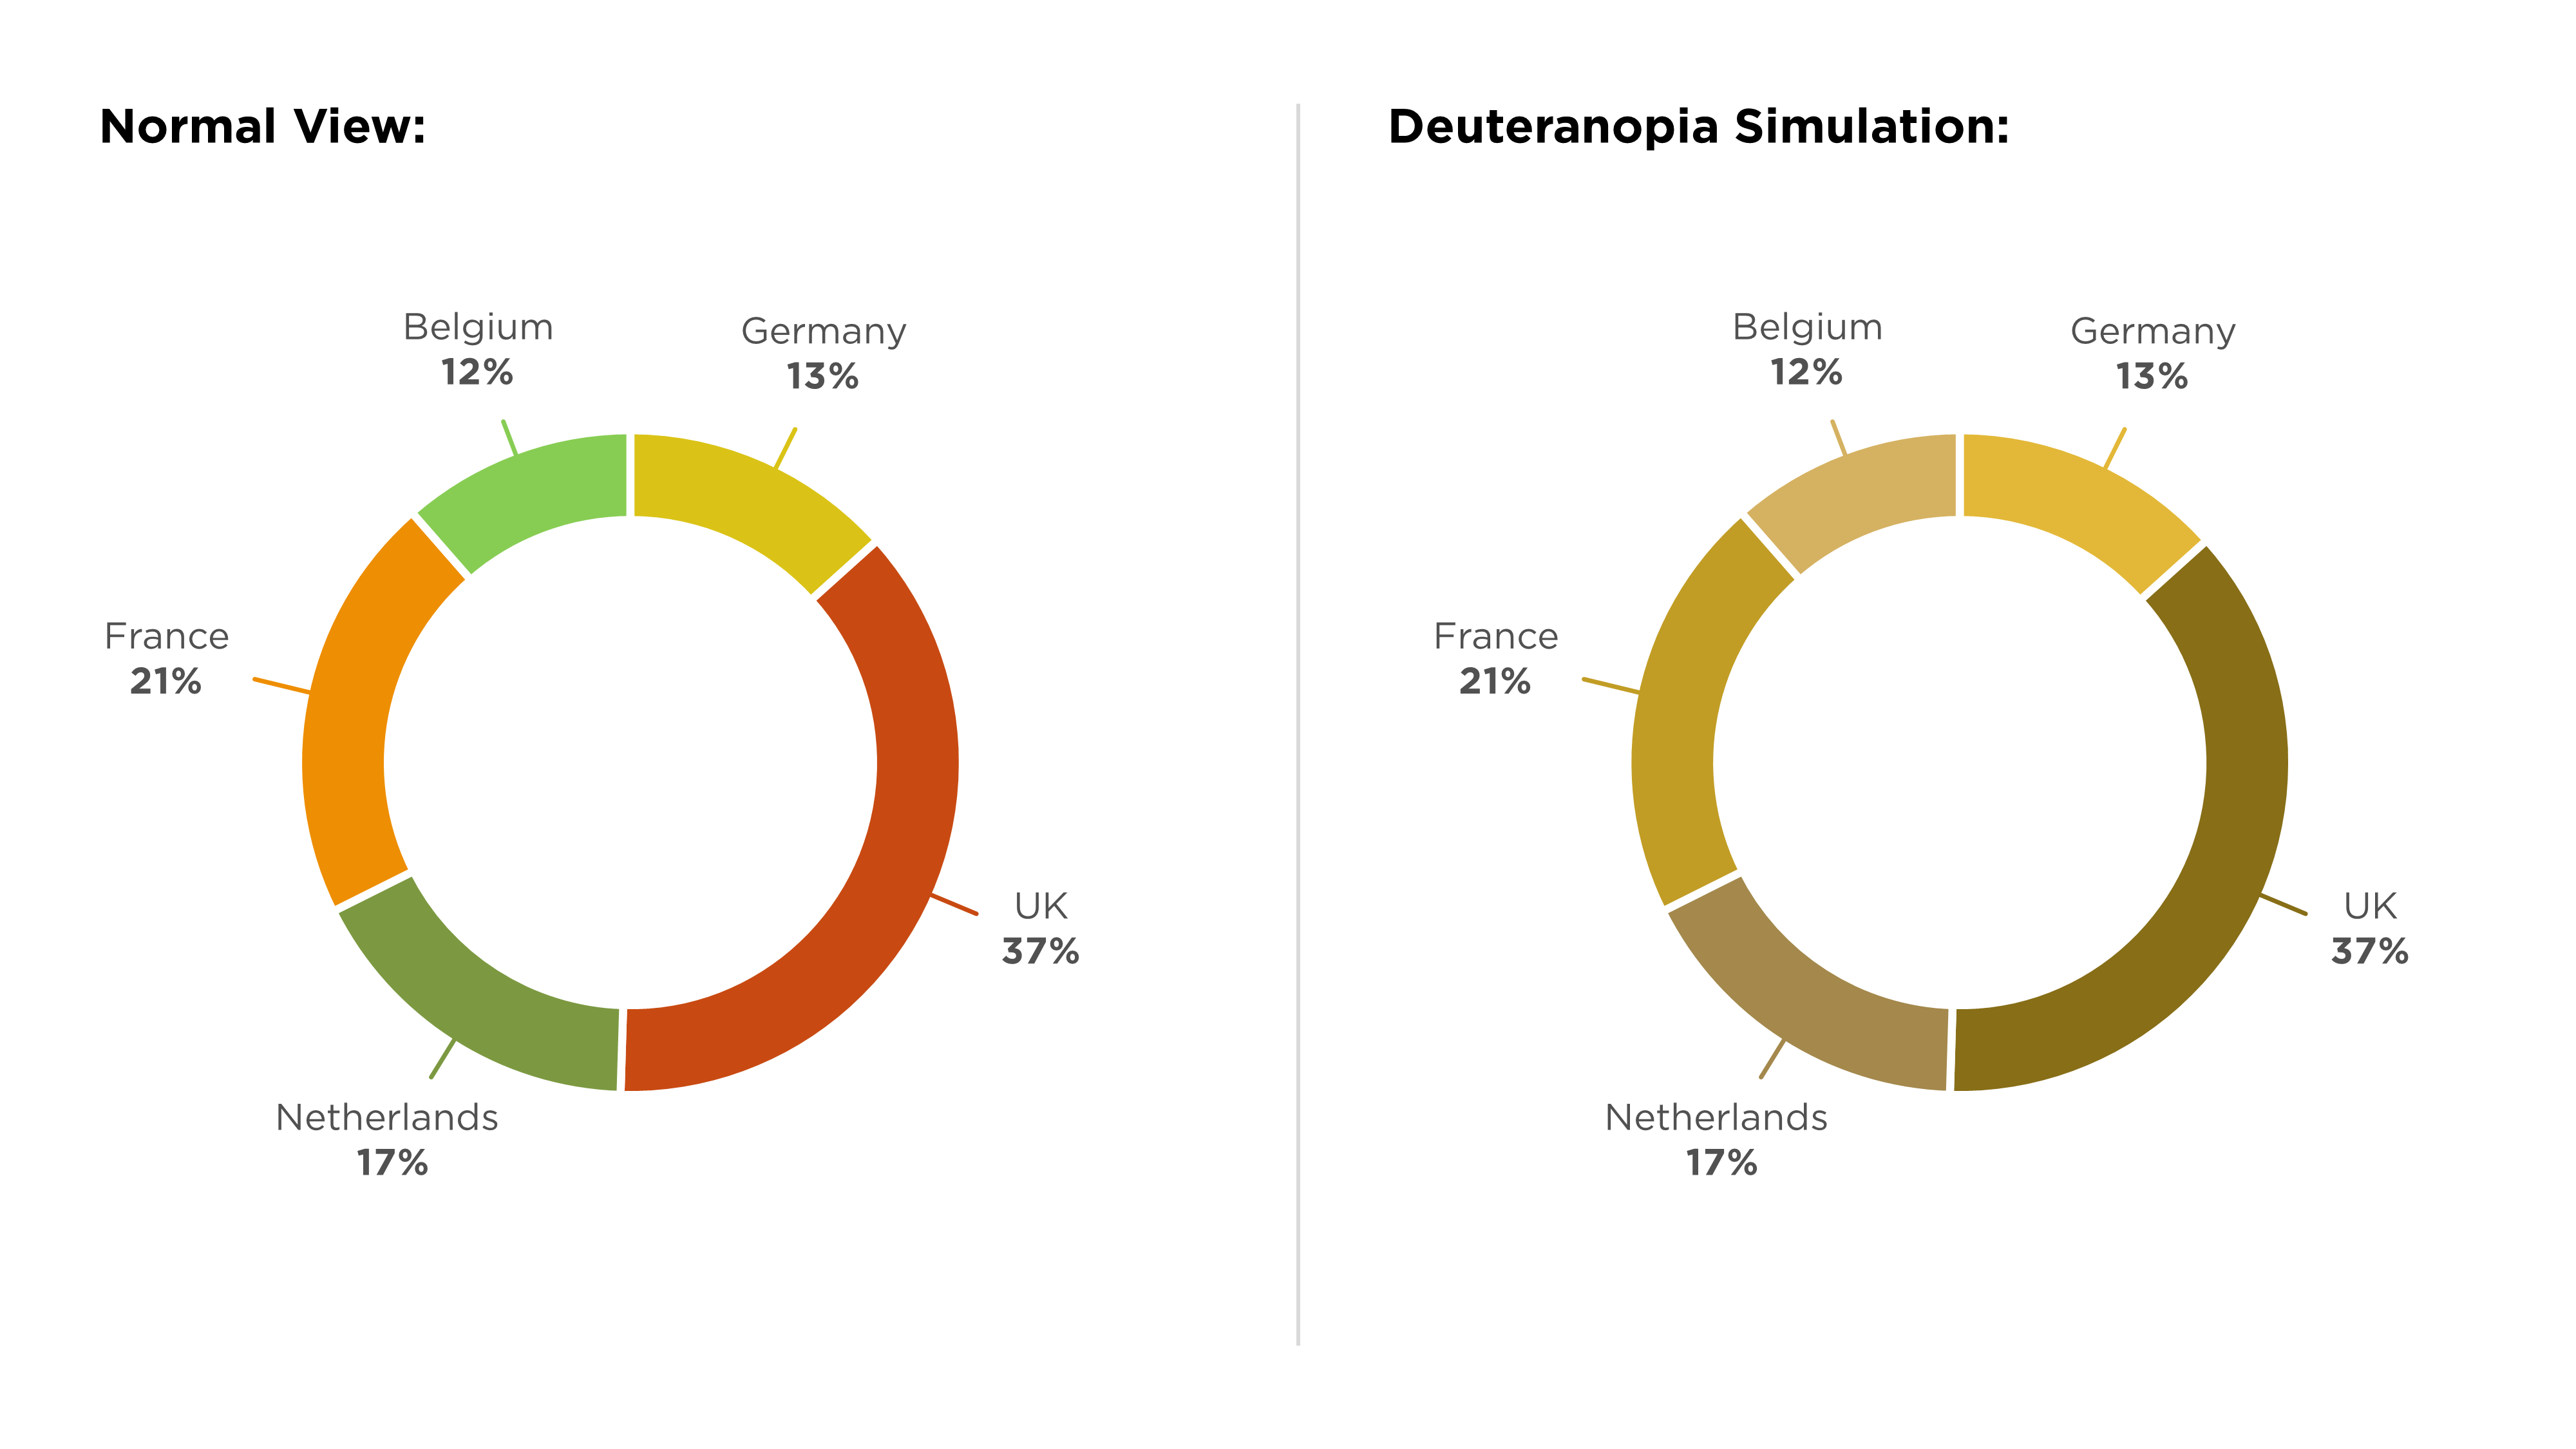 The same doughnut charts as before, however, instead of a legend to the side, each segment is individually labeled with the category name and percentage.